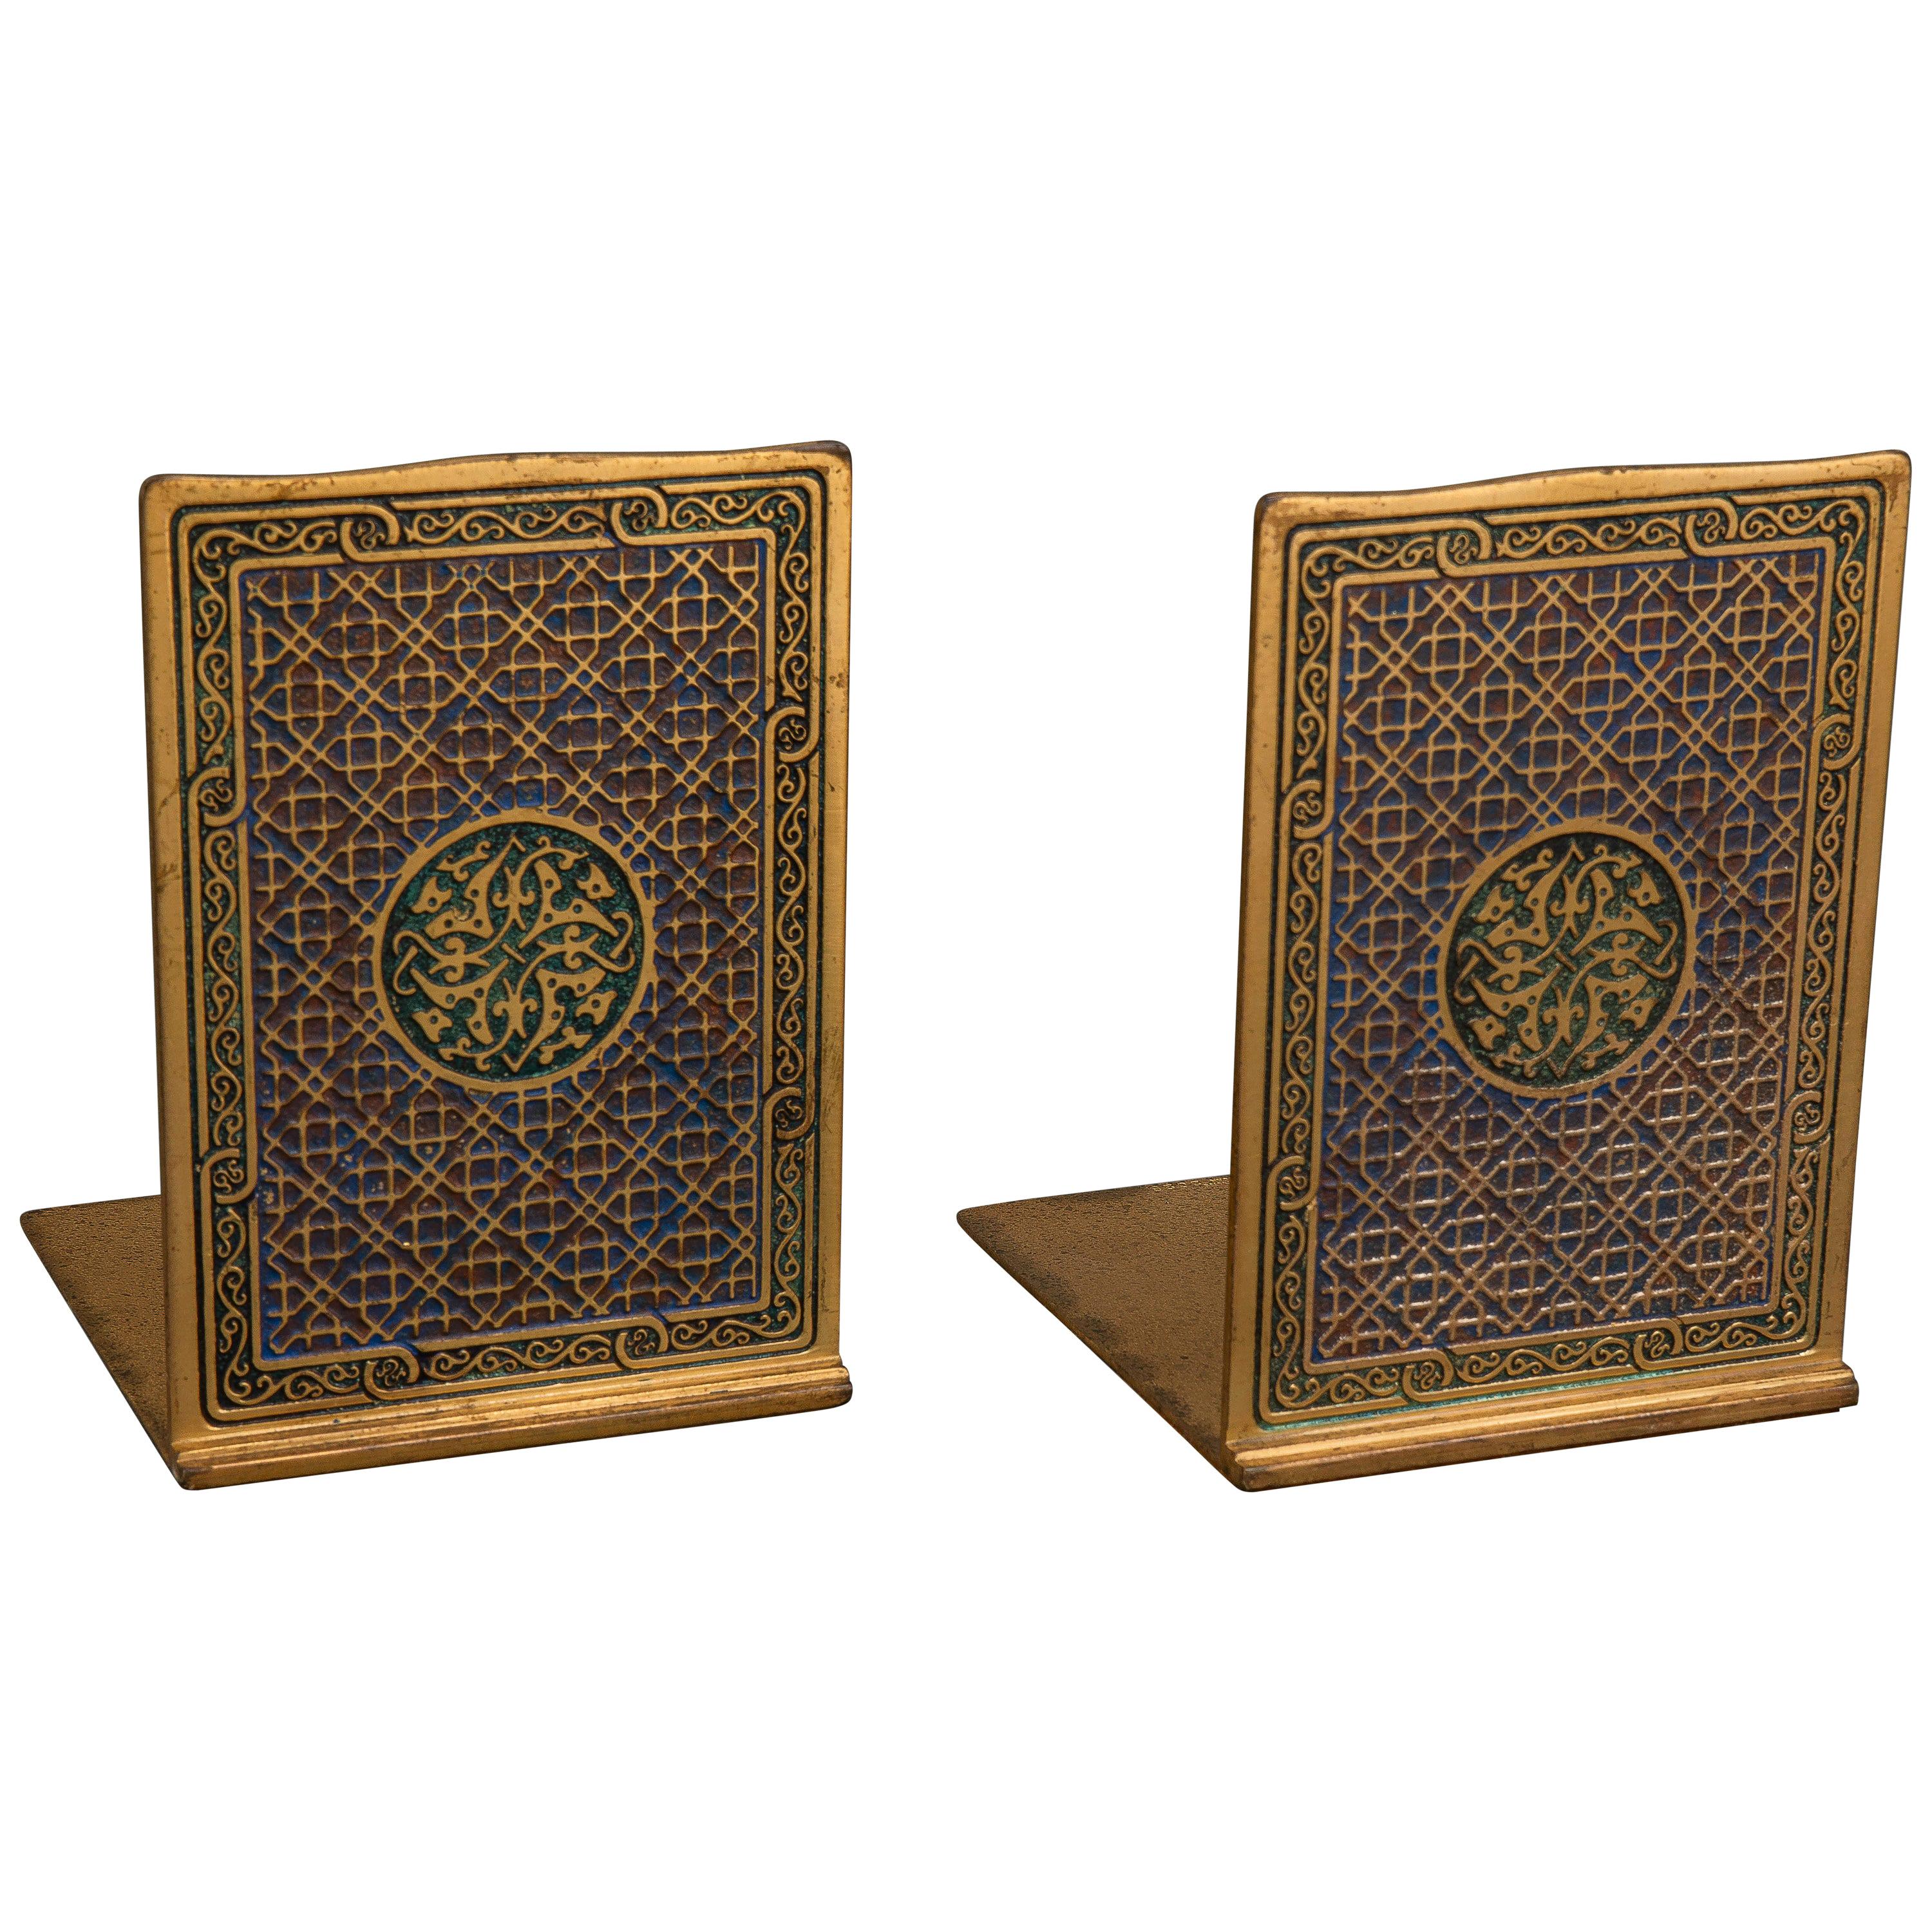 Pair of Tiffany Gilt and Enamel Bookends in the Medallion Pattern '#2028' For Sale